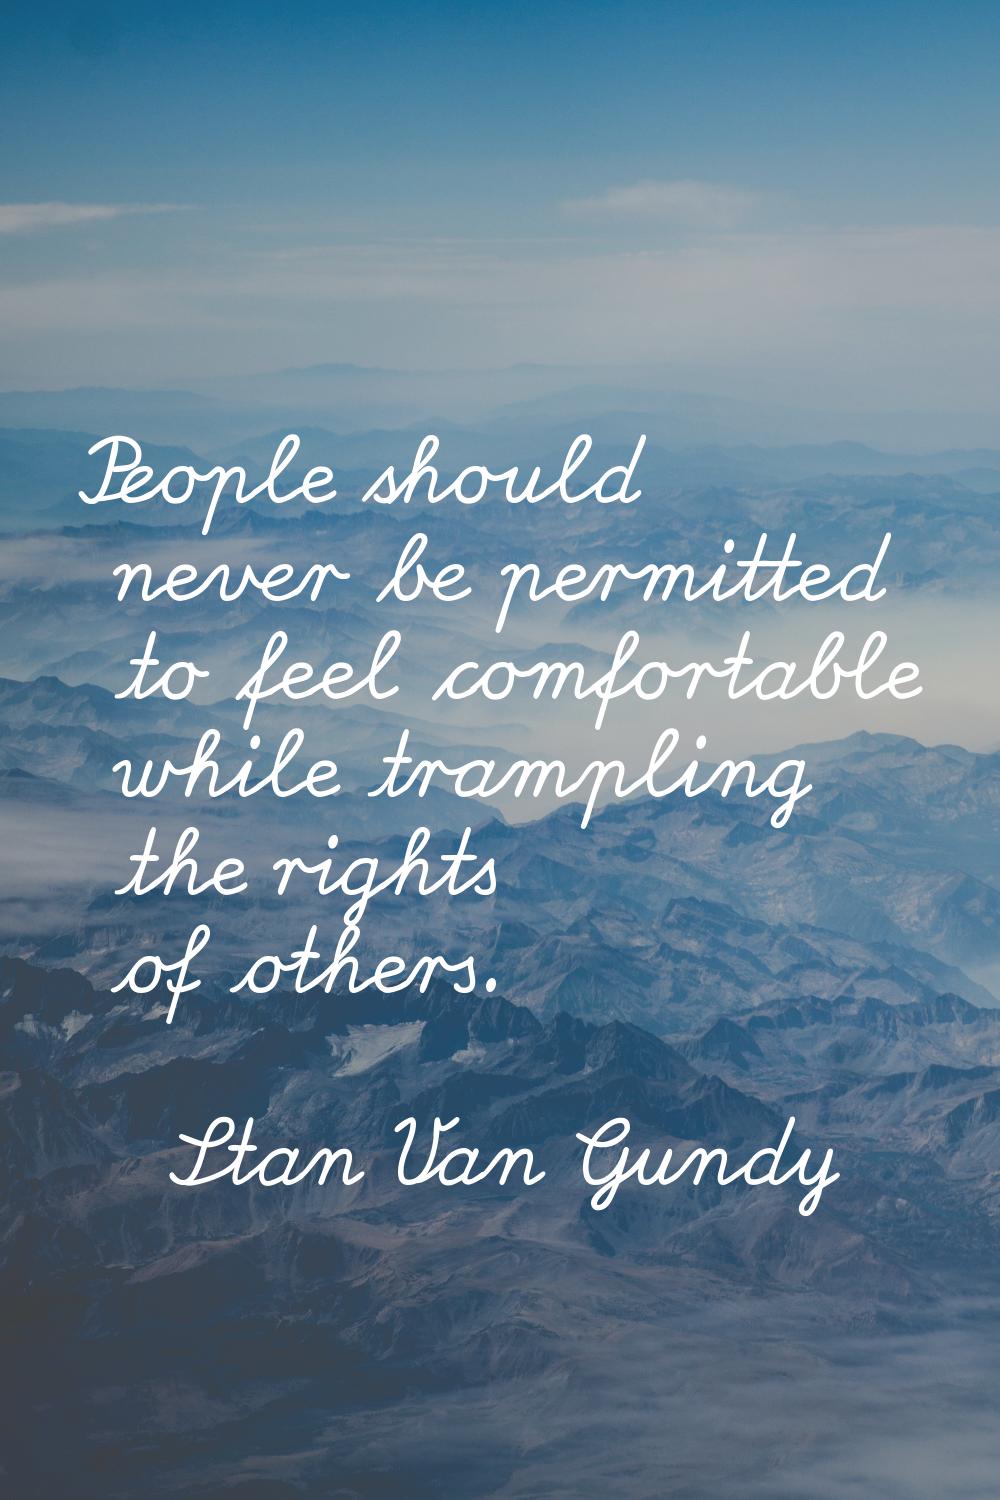 People should never be permitted to feel comfortable while trampling the rights of others.